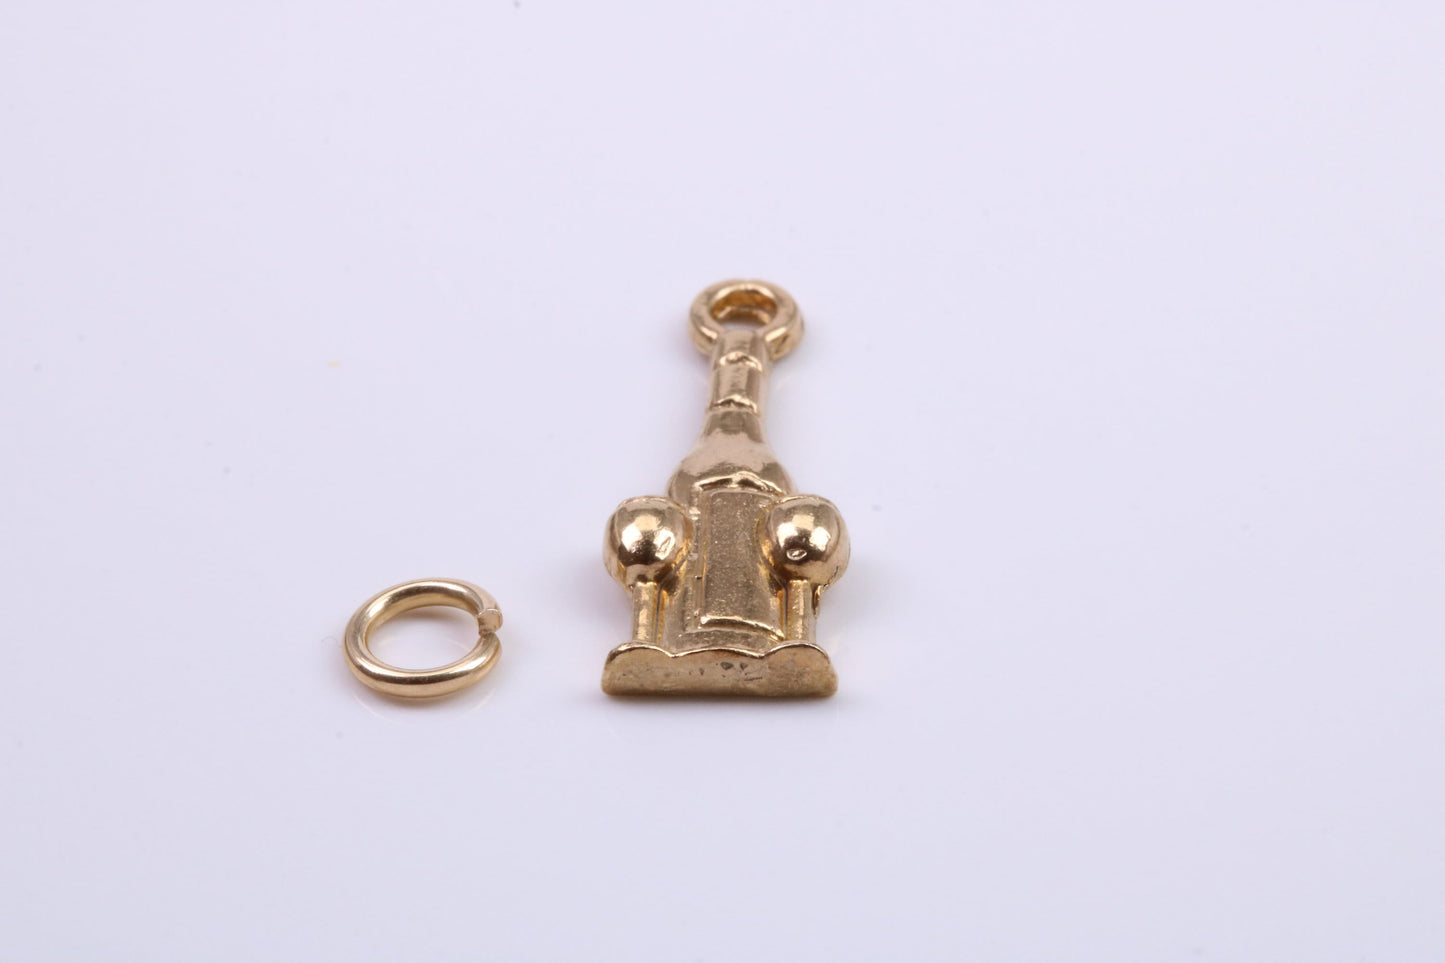 Wine Bottle and Glasses Charm, Traditional Charm, Made from Solid 9ct Yellow Gold, British Hallmarked, Complete with Attachment Link